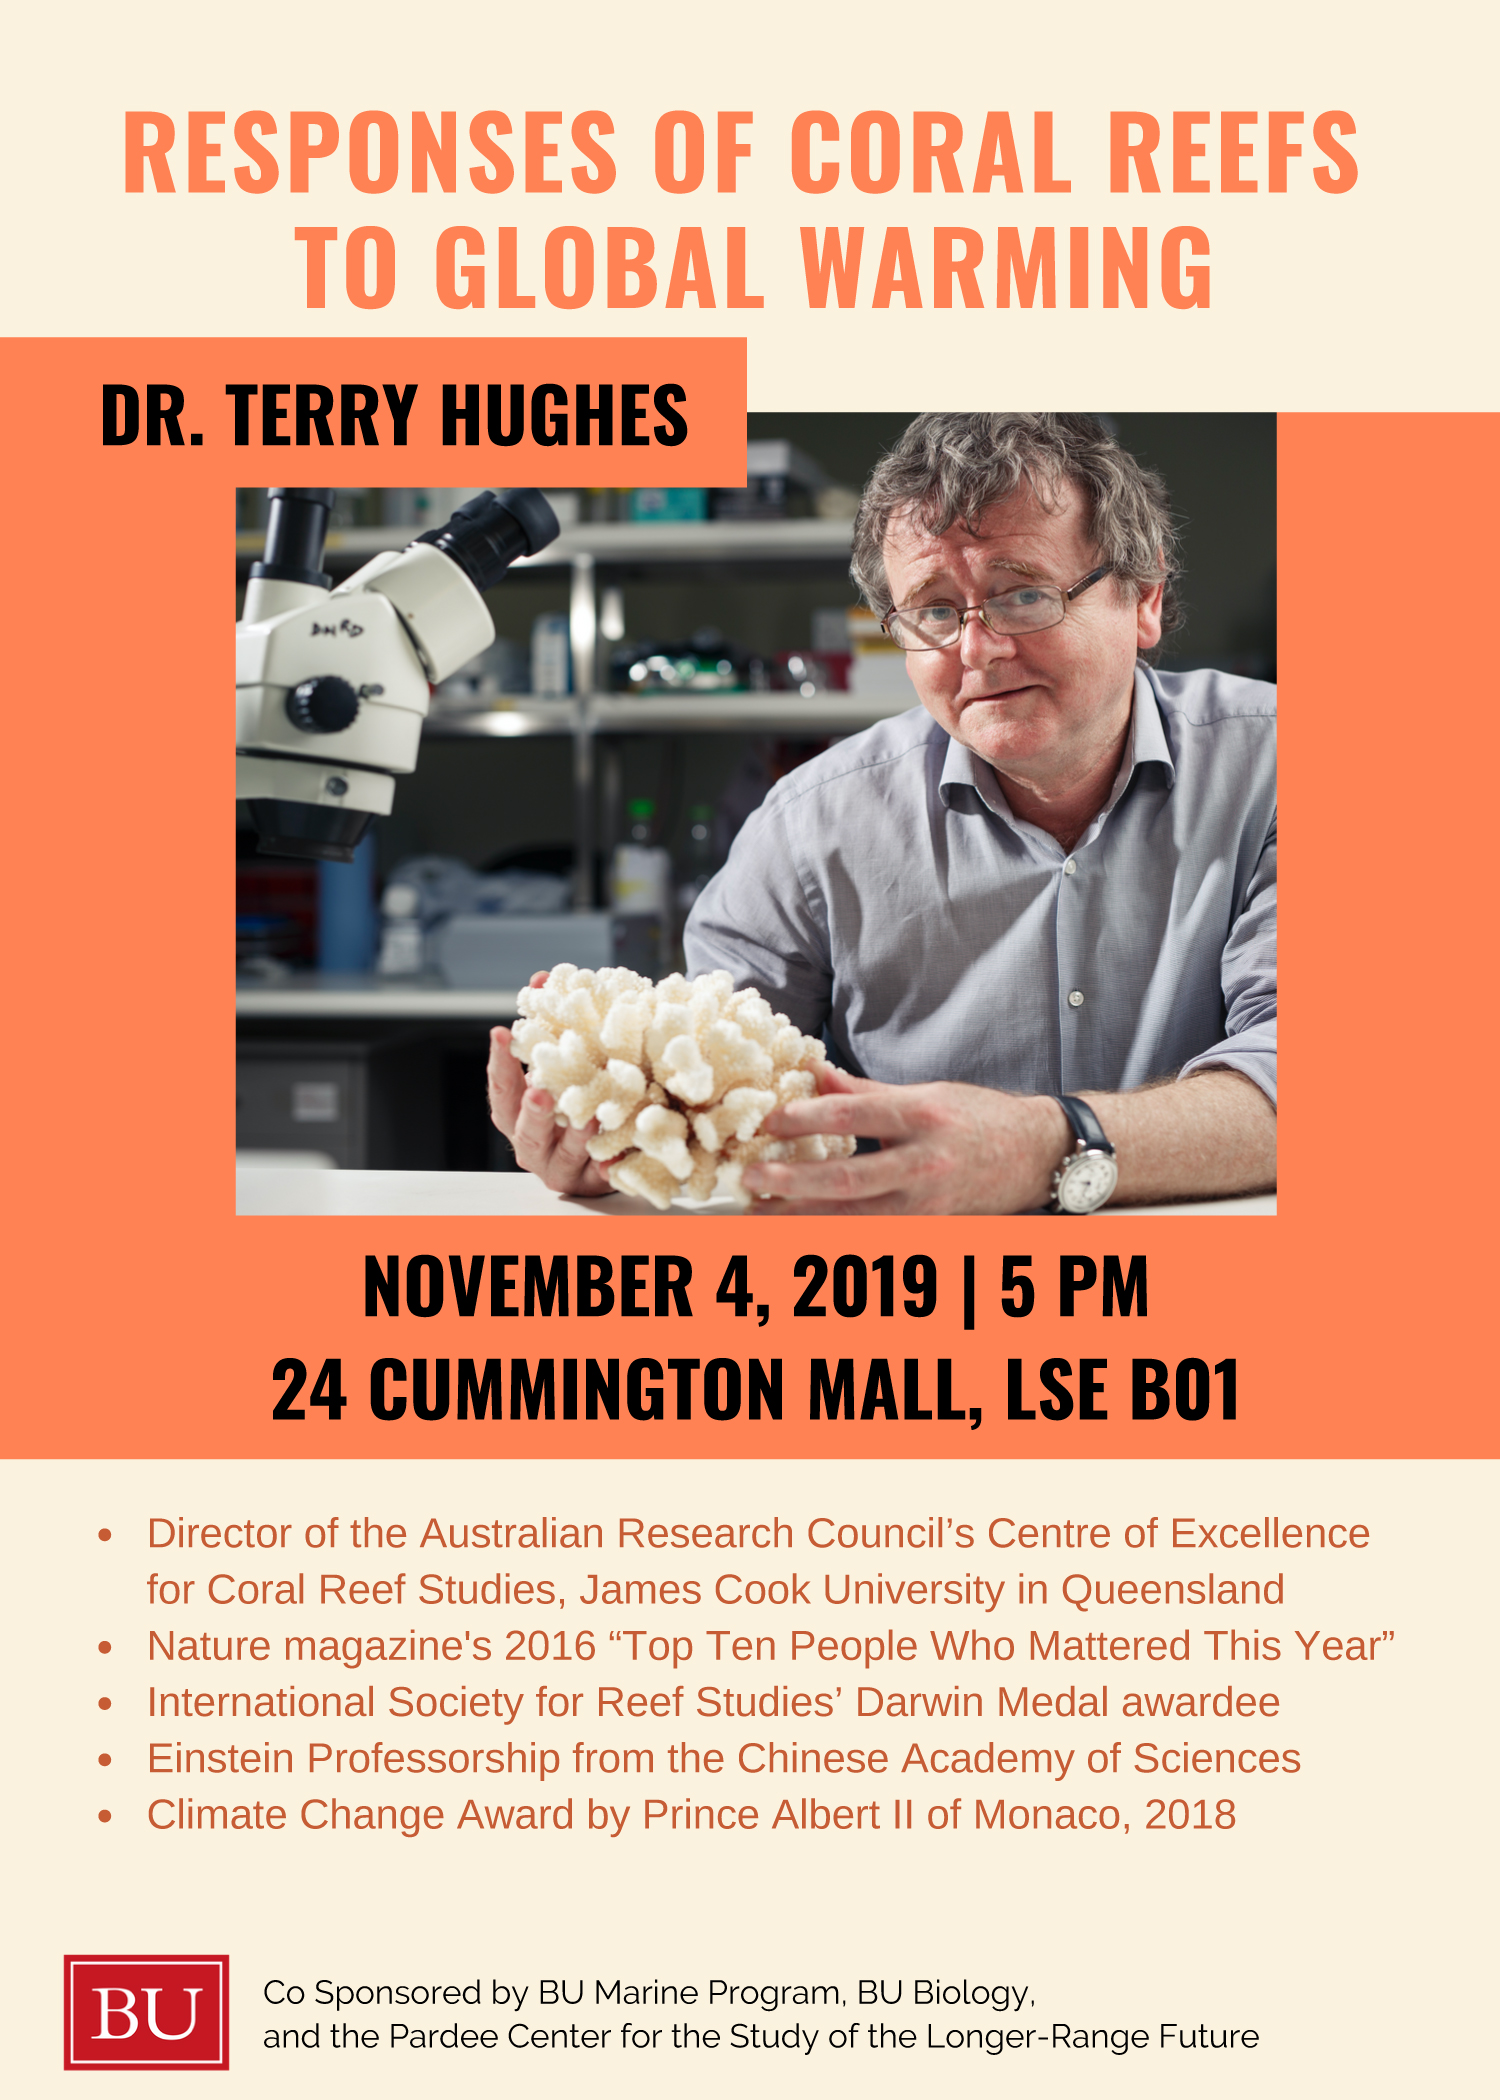 Special Lecture: “Responses of Coral Reefs to Global Warming” by Terry Hughes | The Frederick S. Pardee Center for the Study of the Longer-Range Future - BU Today